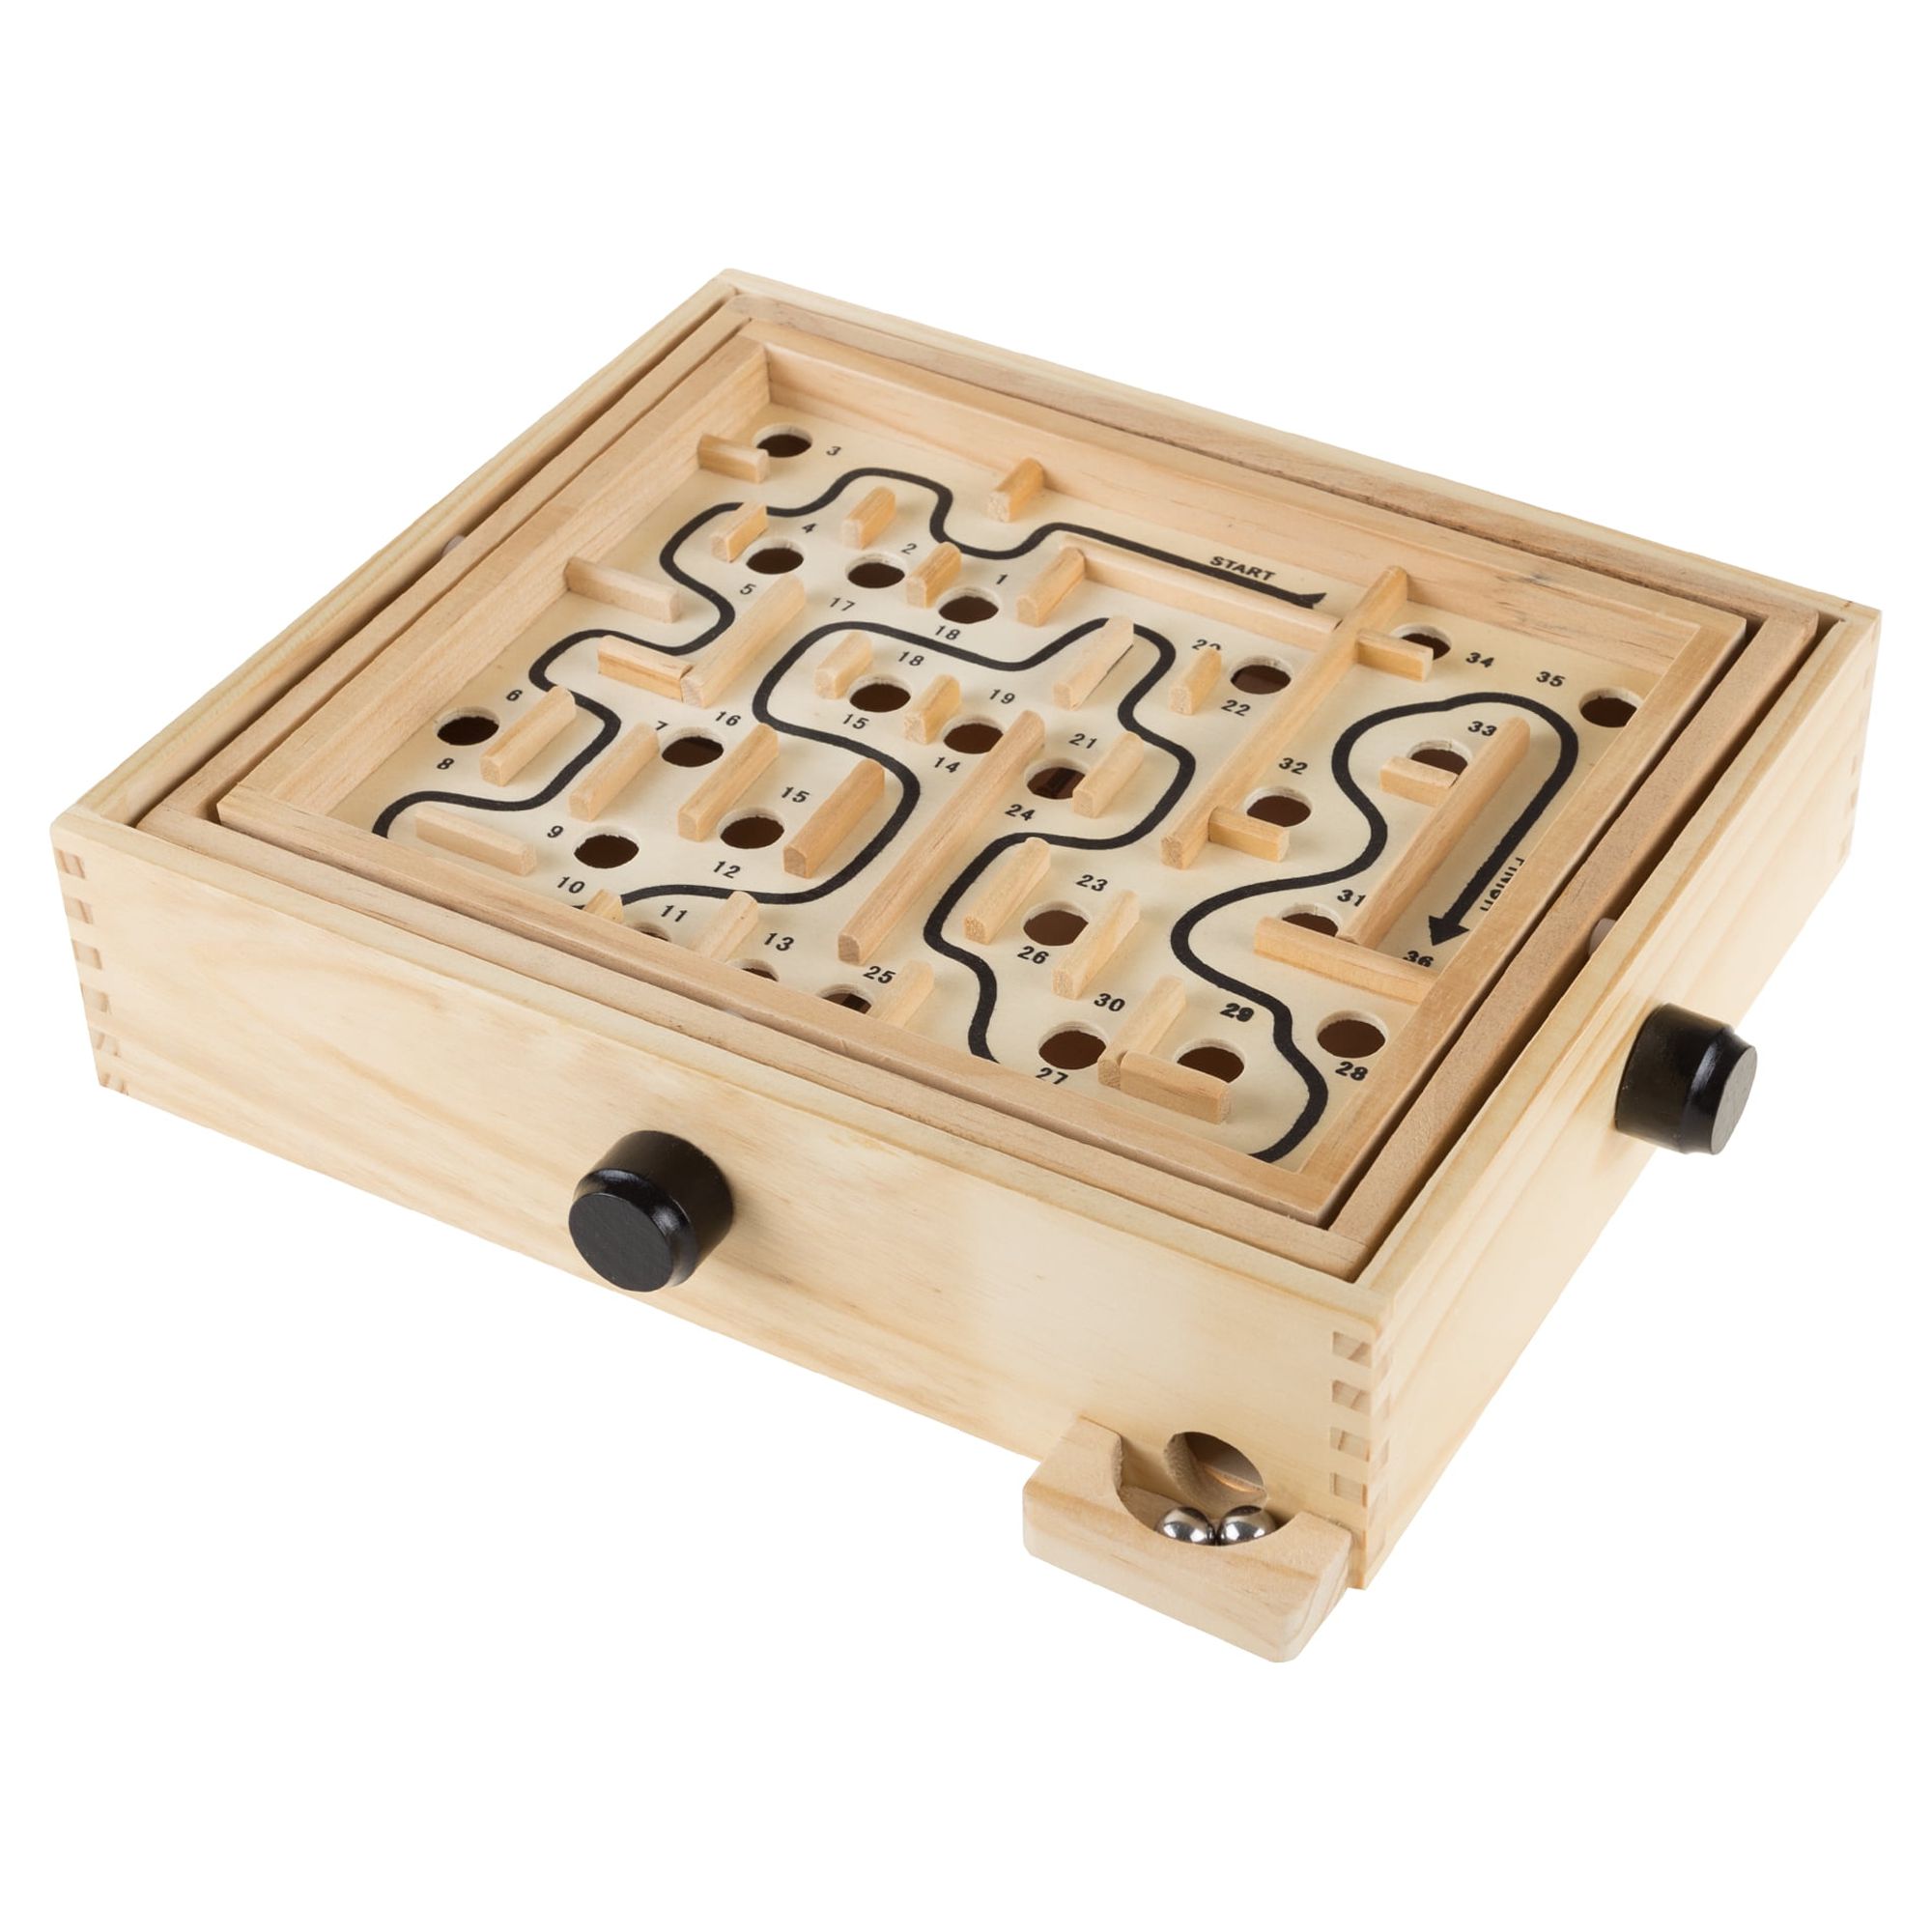 Labyrinth Wooden Maze Game with Two Steel Marbles by Hey! Play! - image 1 of 6